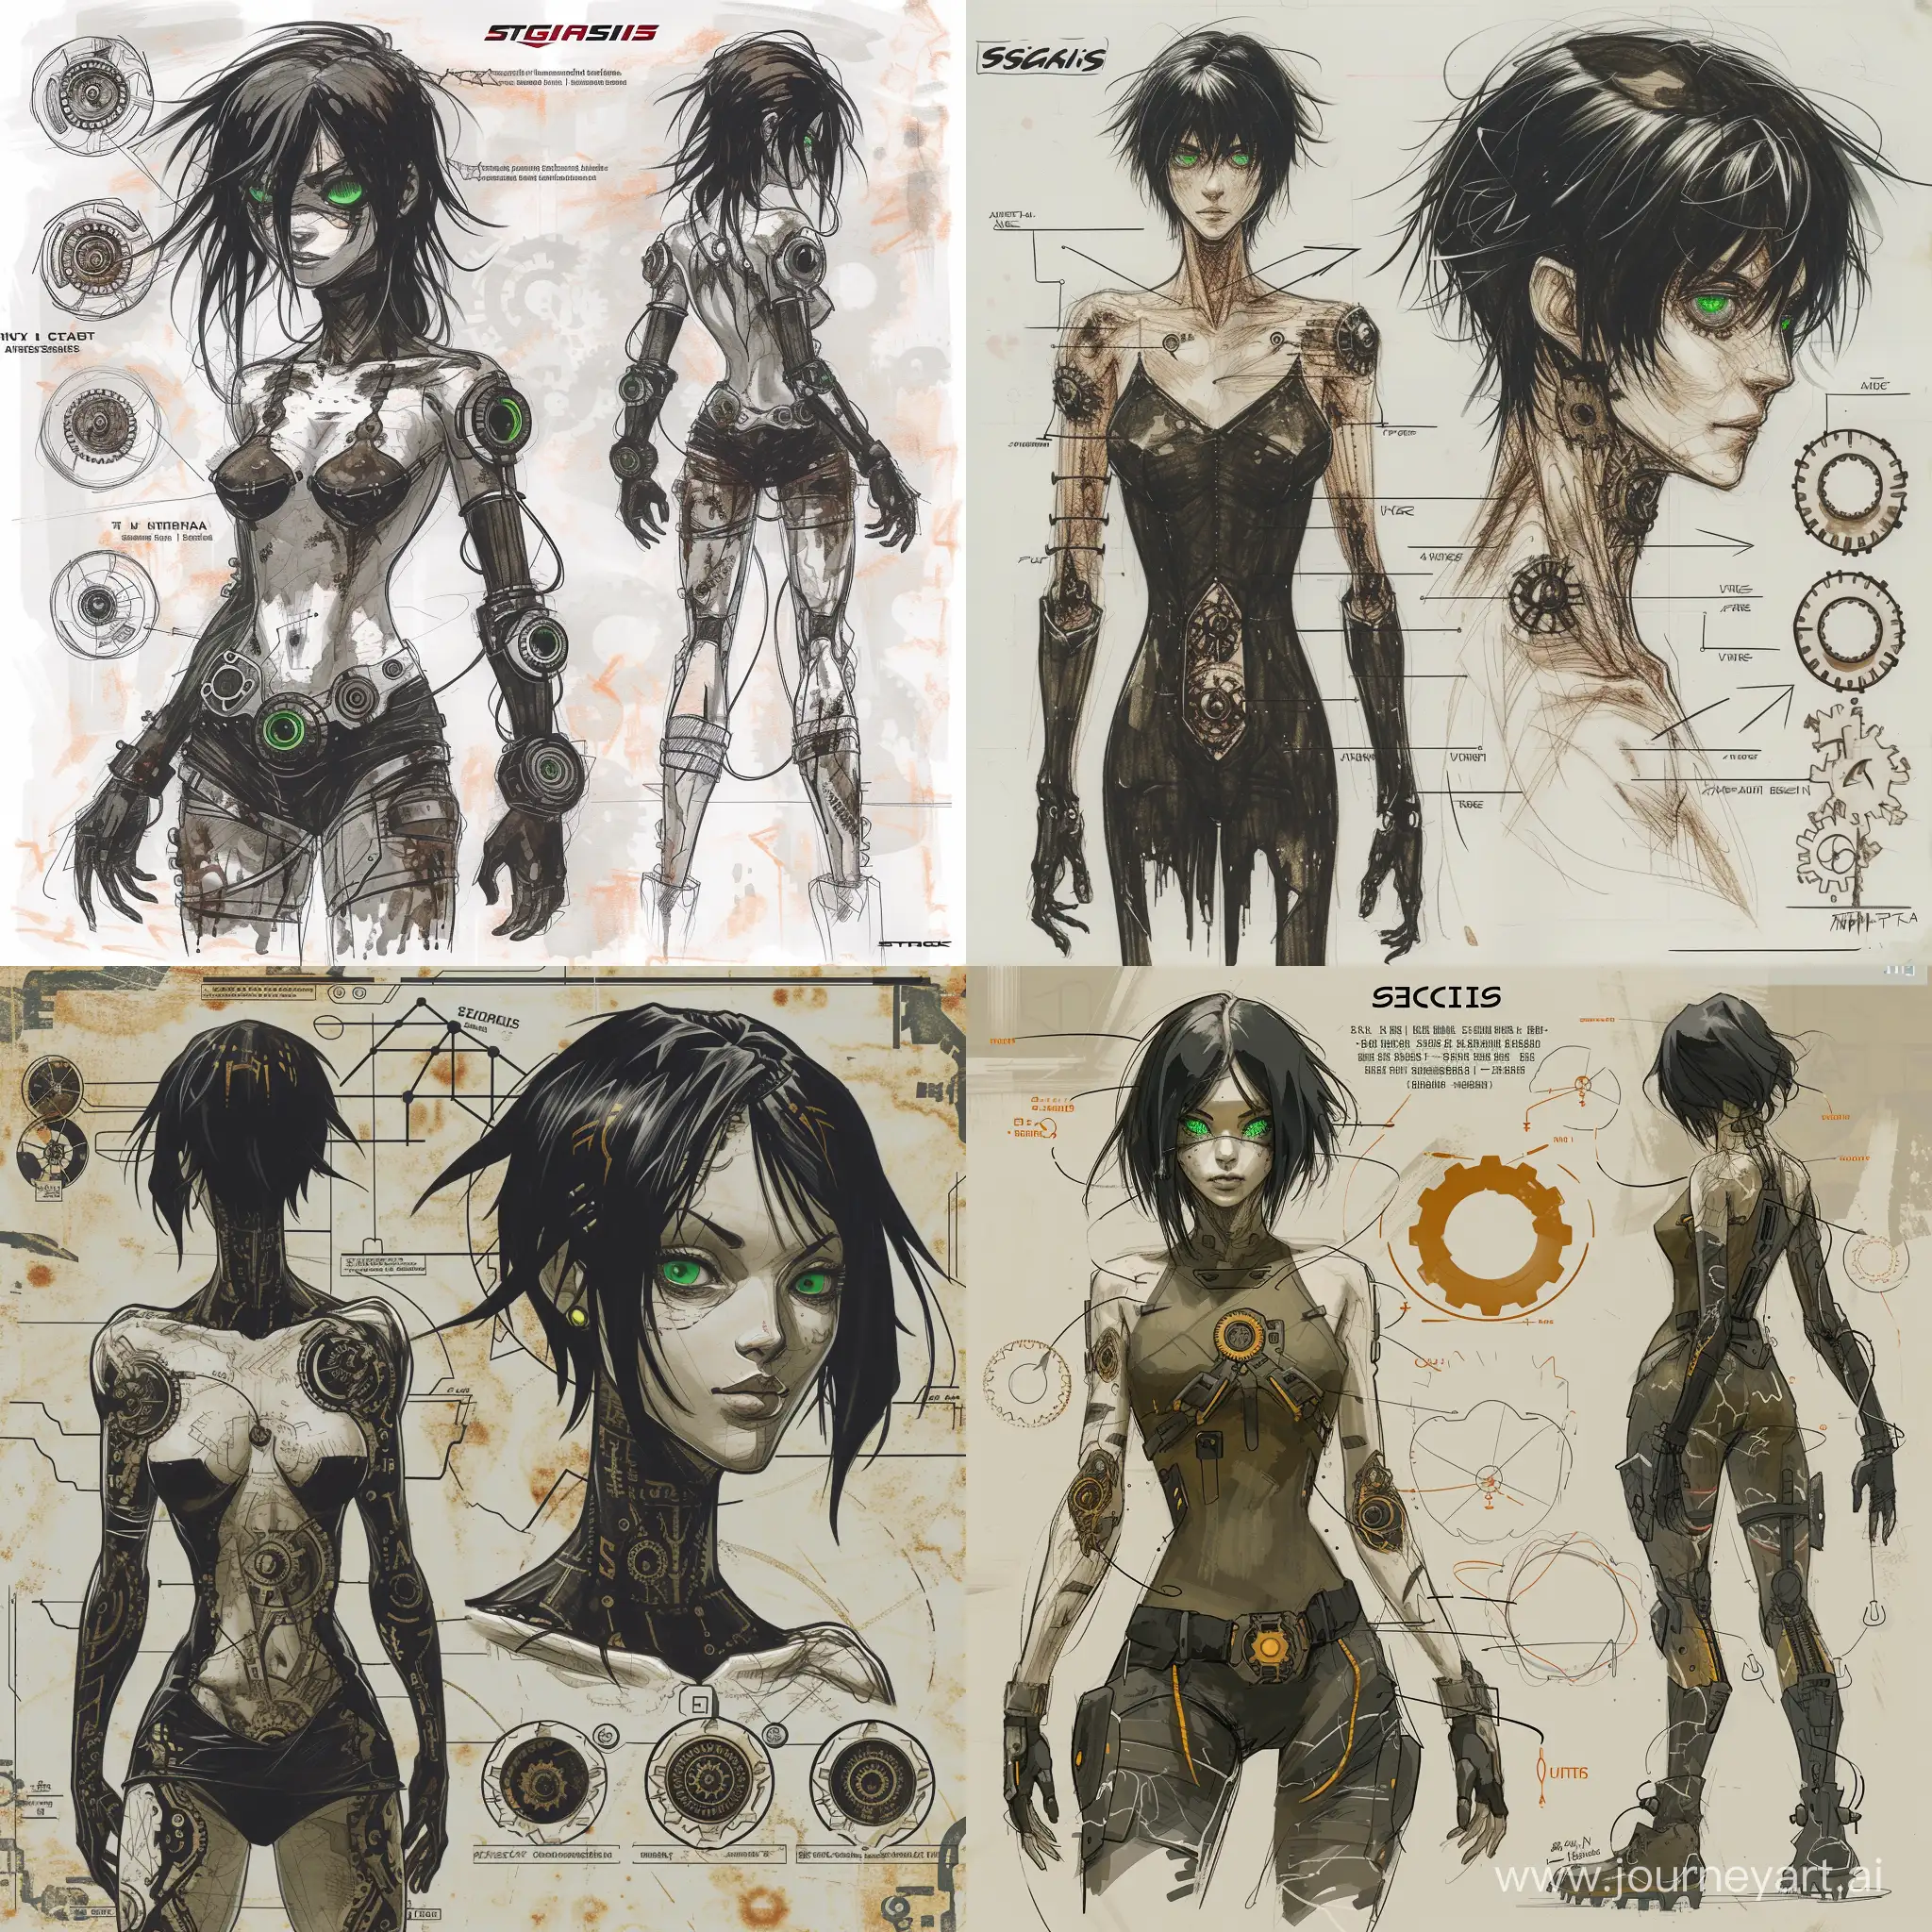 Gothic-Cyborg-Femme-Fatale-Revealing-Inner-Machinery-Signalis-Video-Game-Inspired-Art